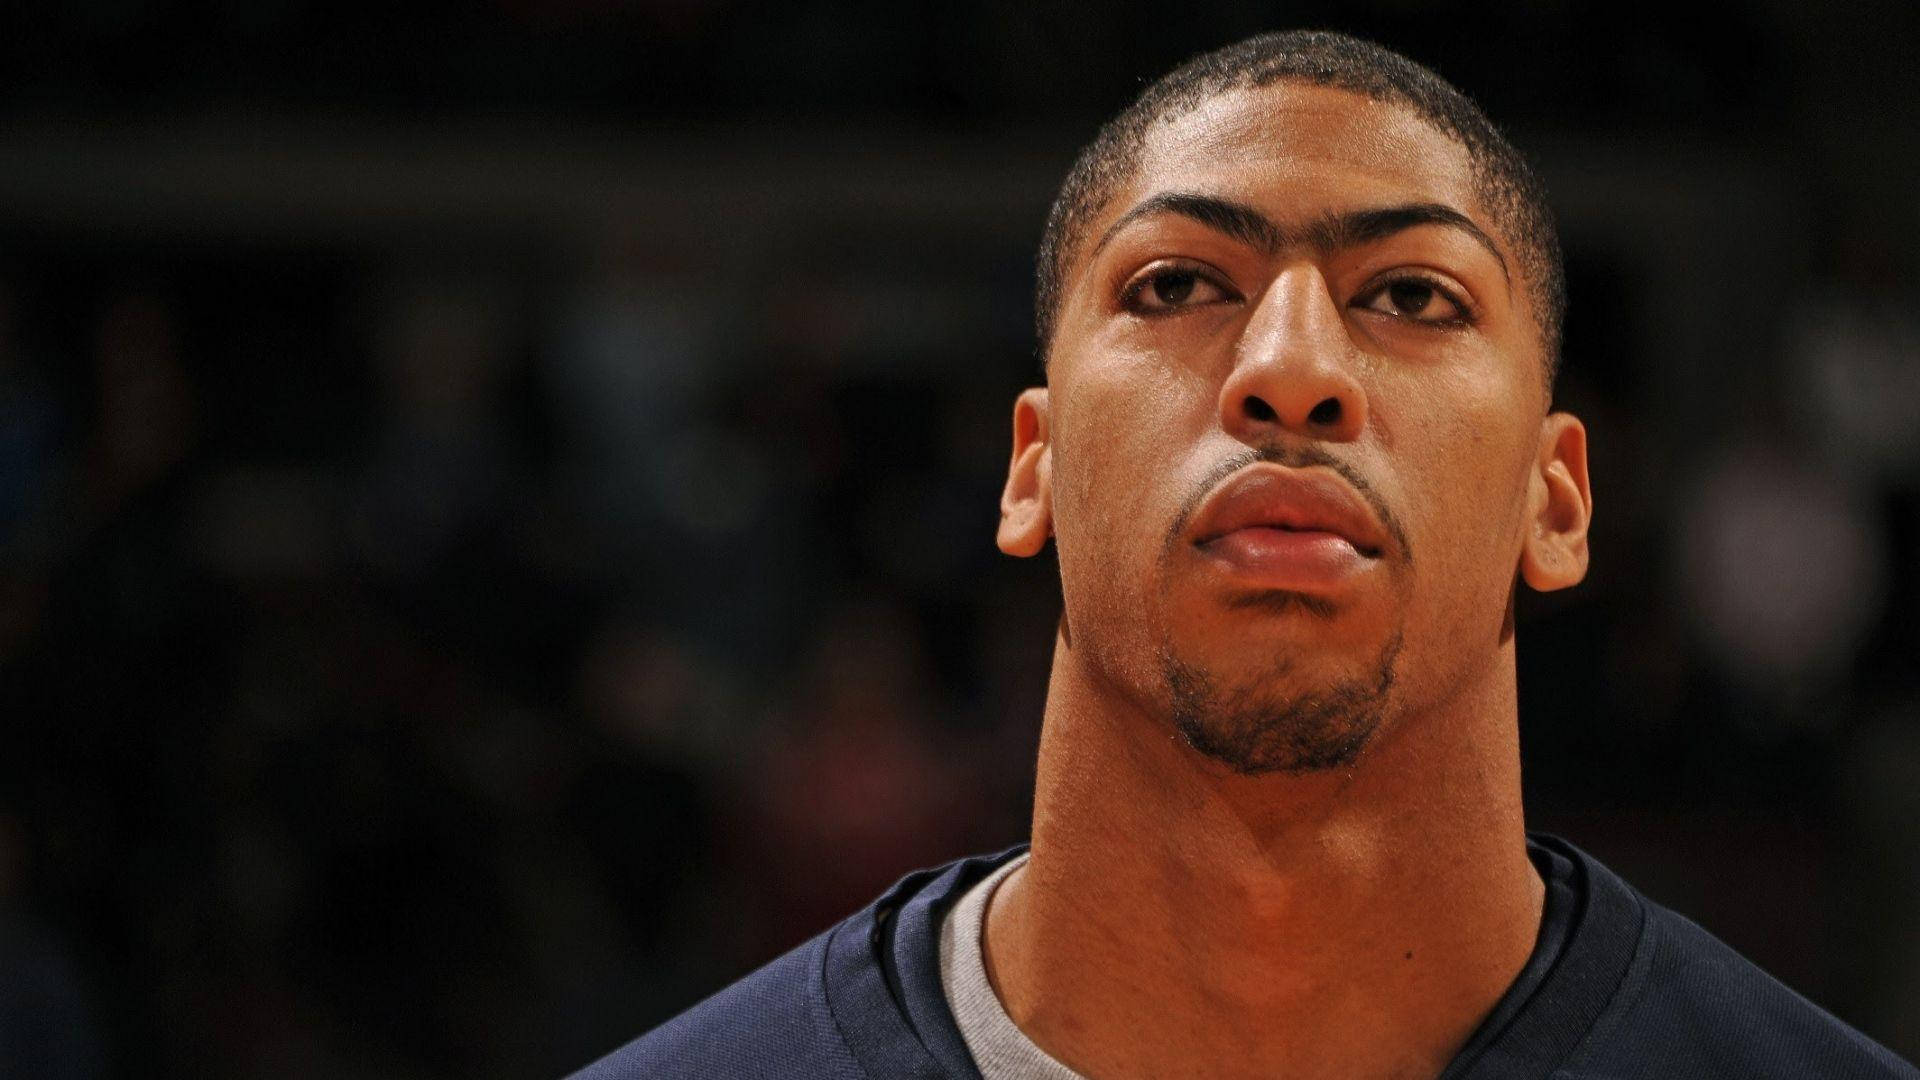 Anthony Davis 1920X1080 Wallpaper and Background Image